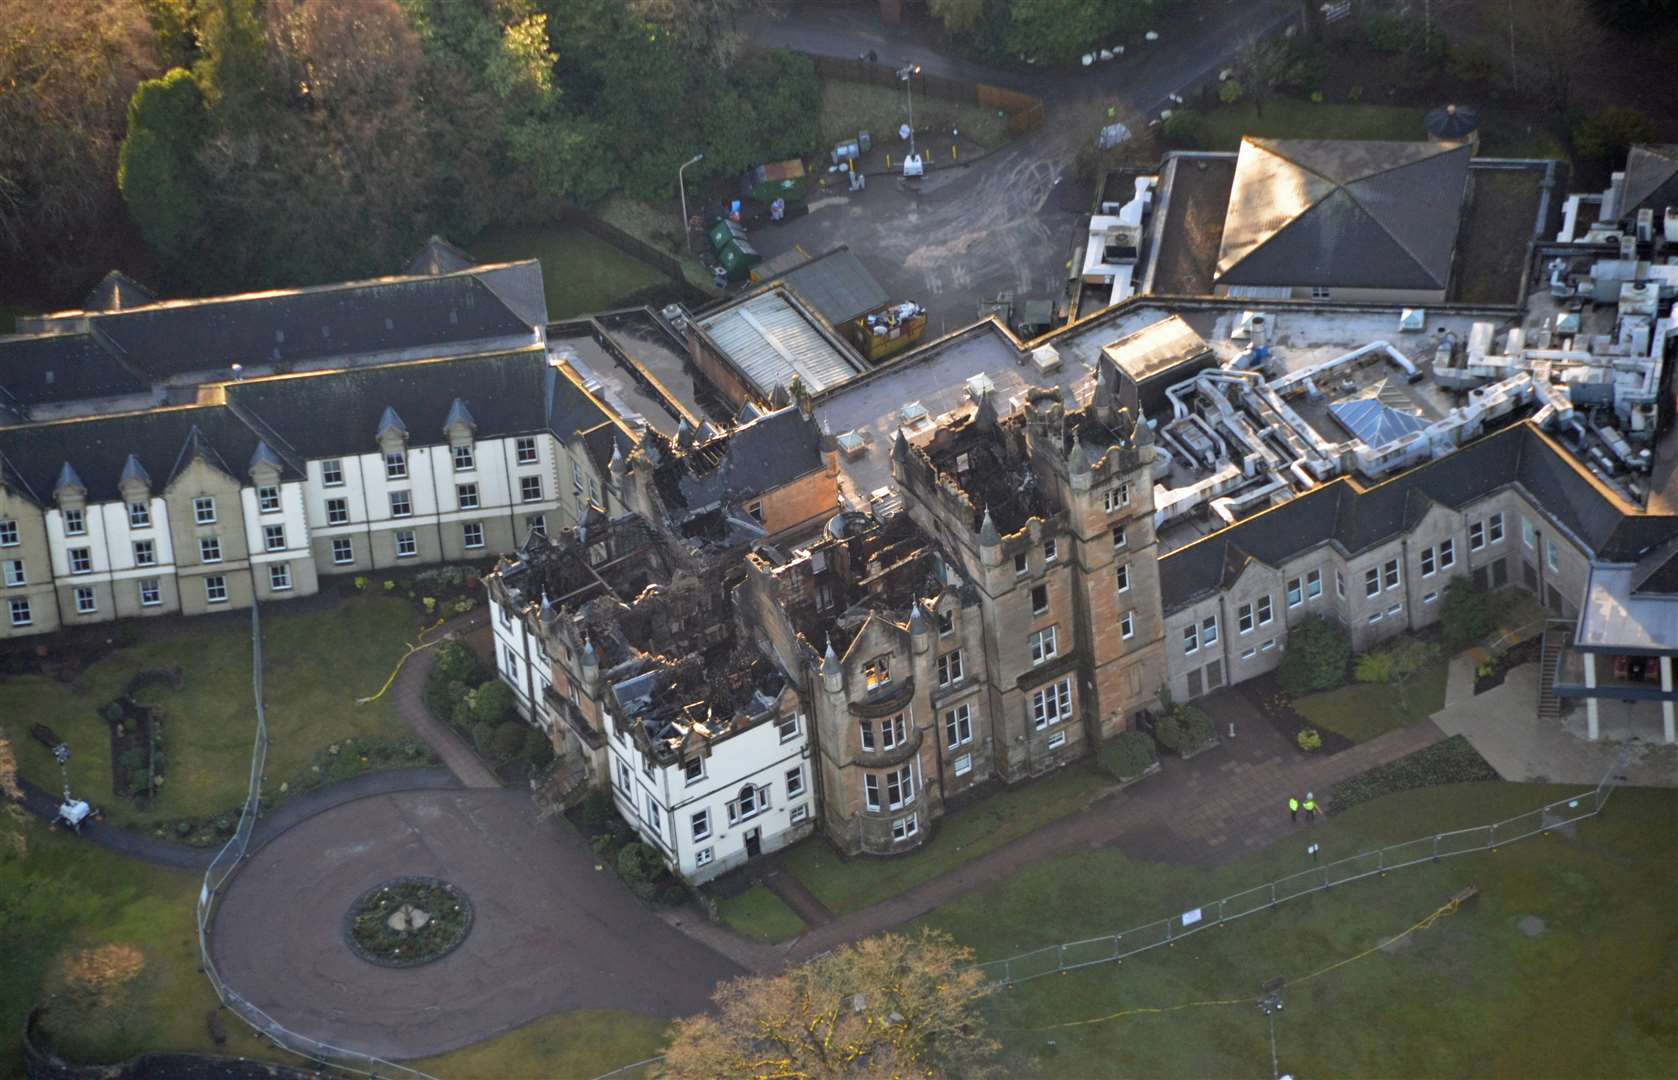 The Cameron House hotel was severely damaged in the fire (Crown Office/PA)